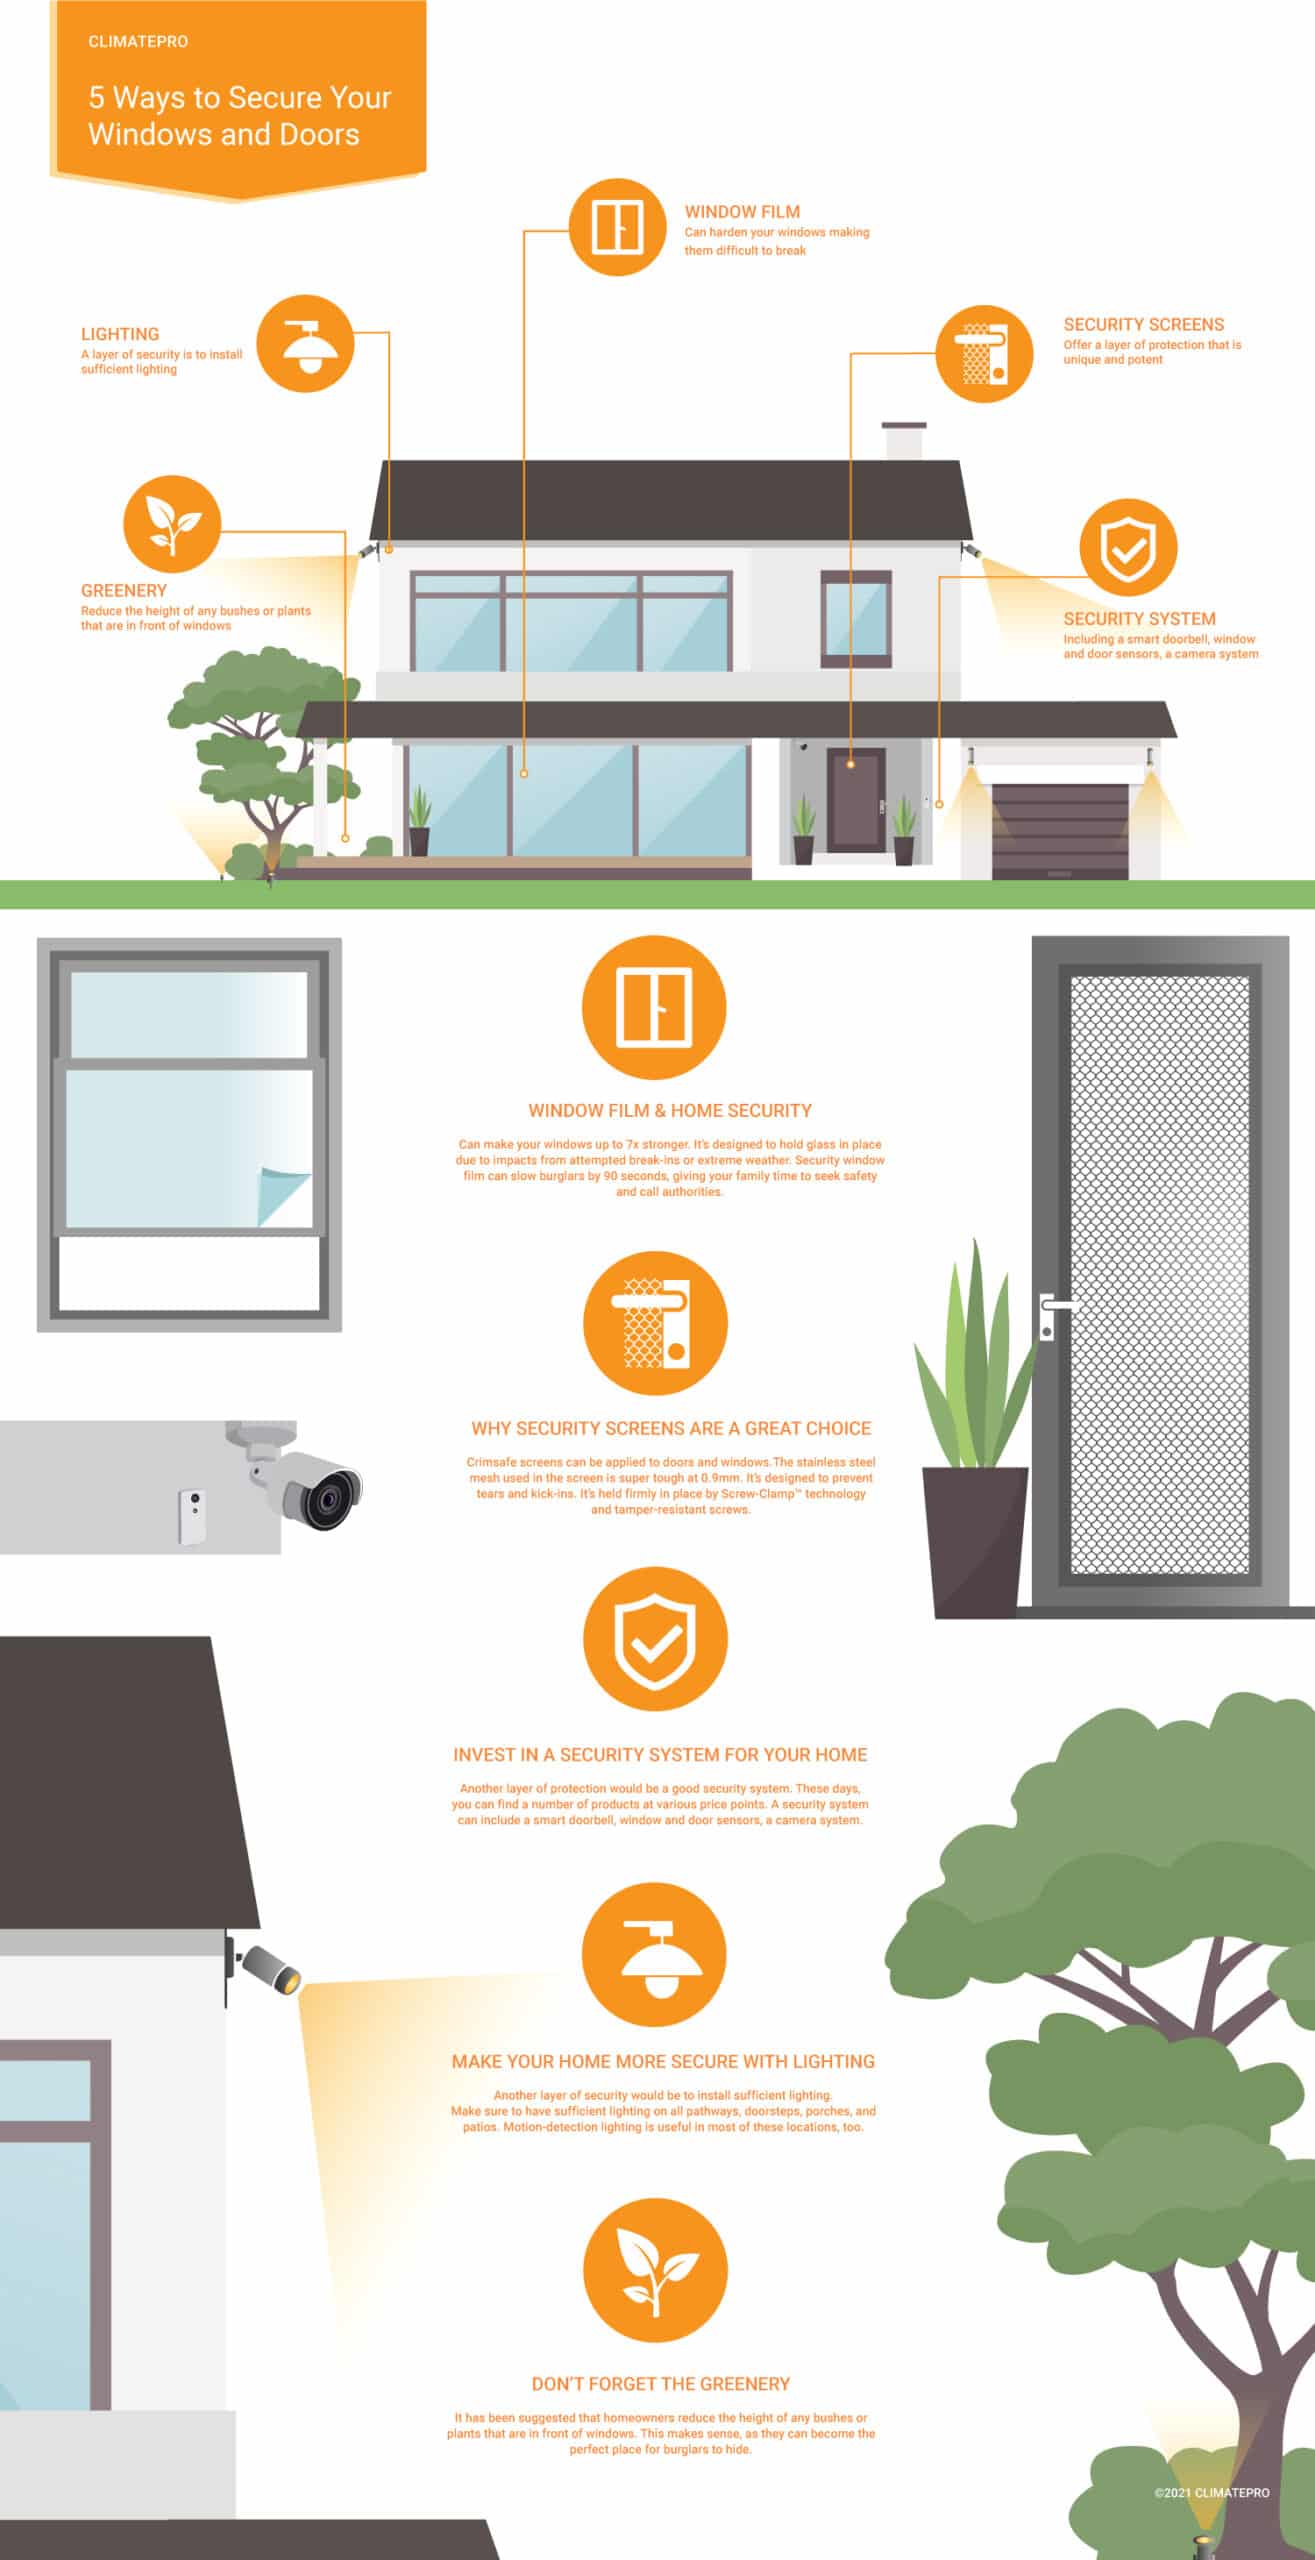 5 ways to make your windows and doors more secure. From ClimatePro.